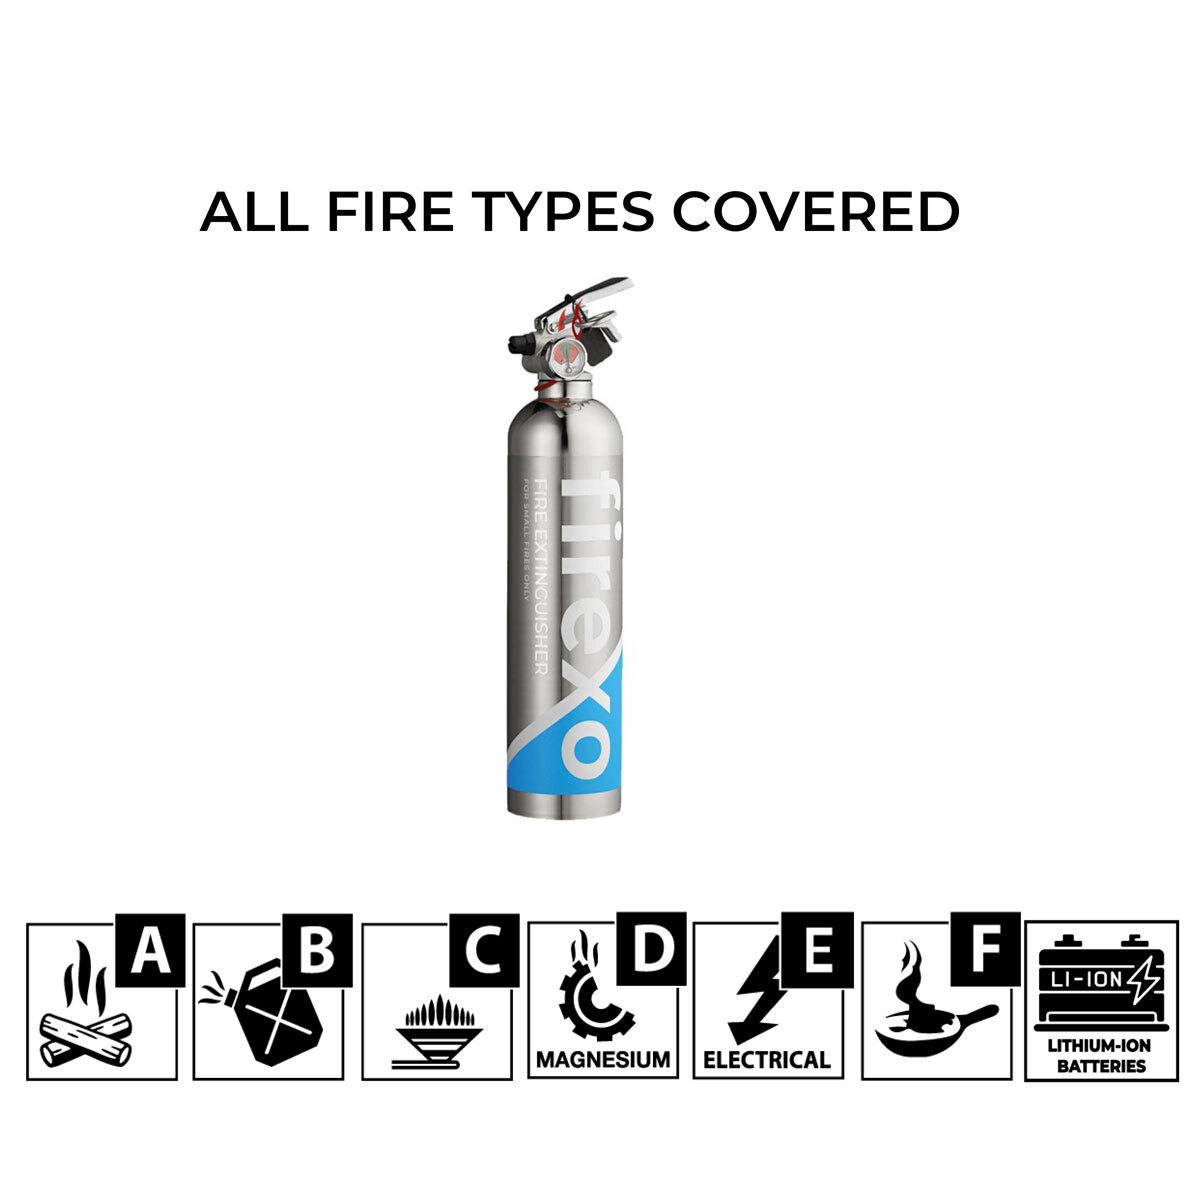 Cut out image of product on white background with compatible fires